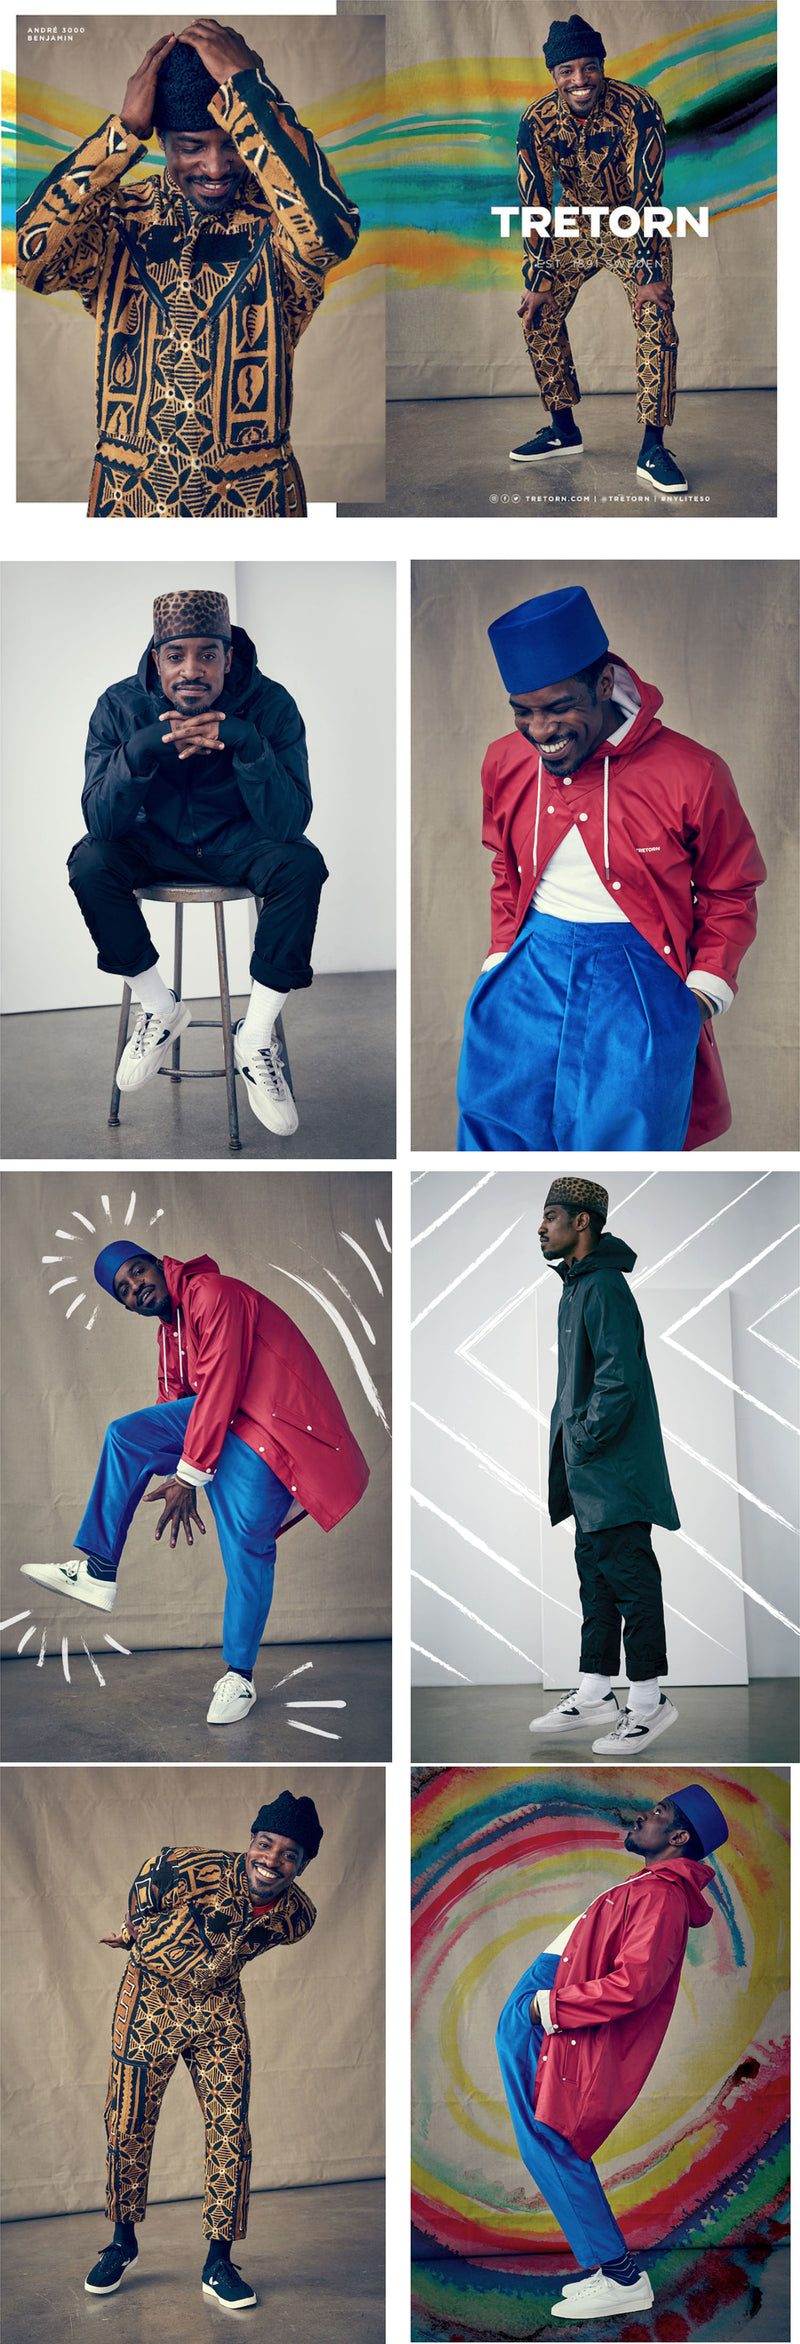 André 3000  in Tretorn’s Fall Collection